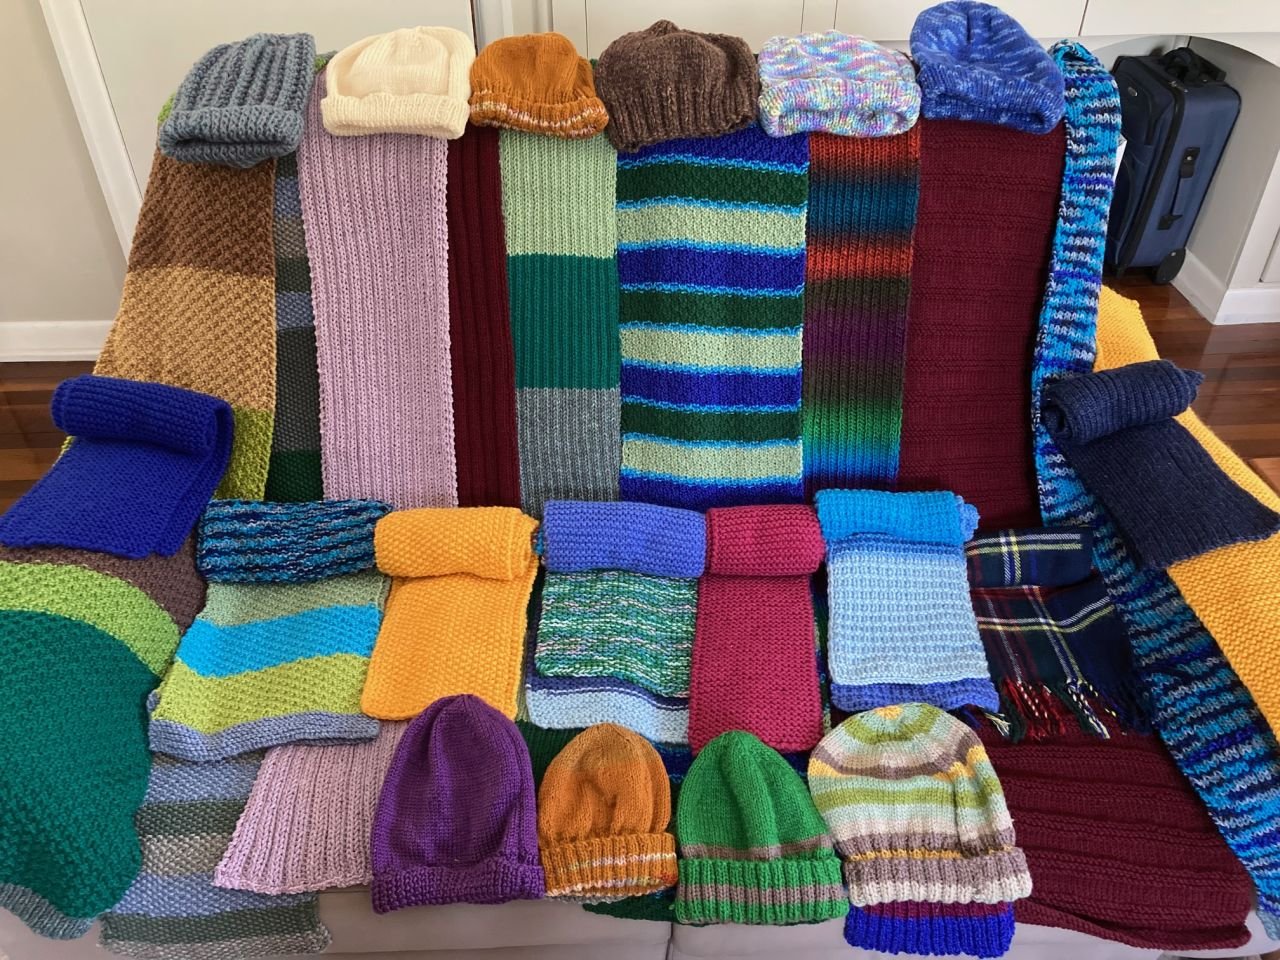 Beanies & Scarves knitted by members of Coorparoo Branch during 2021 for donation to the Brisbane Mission to Seafarers